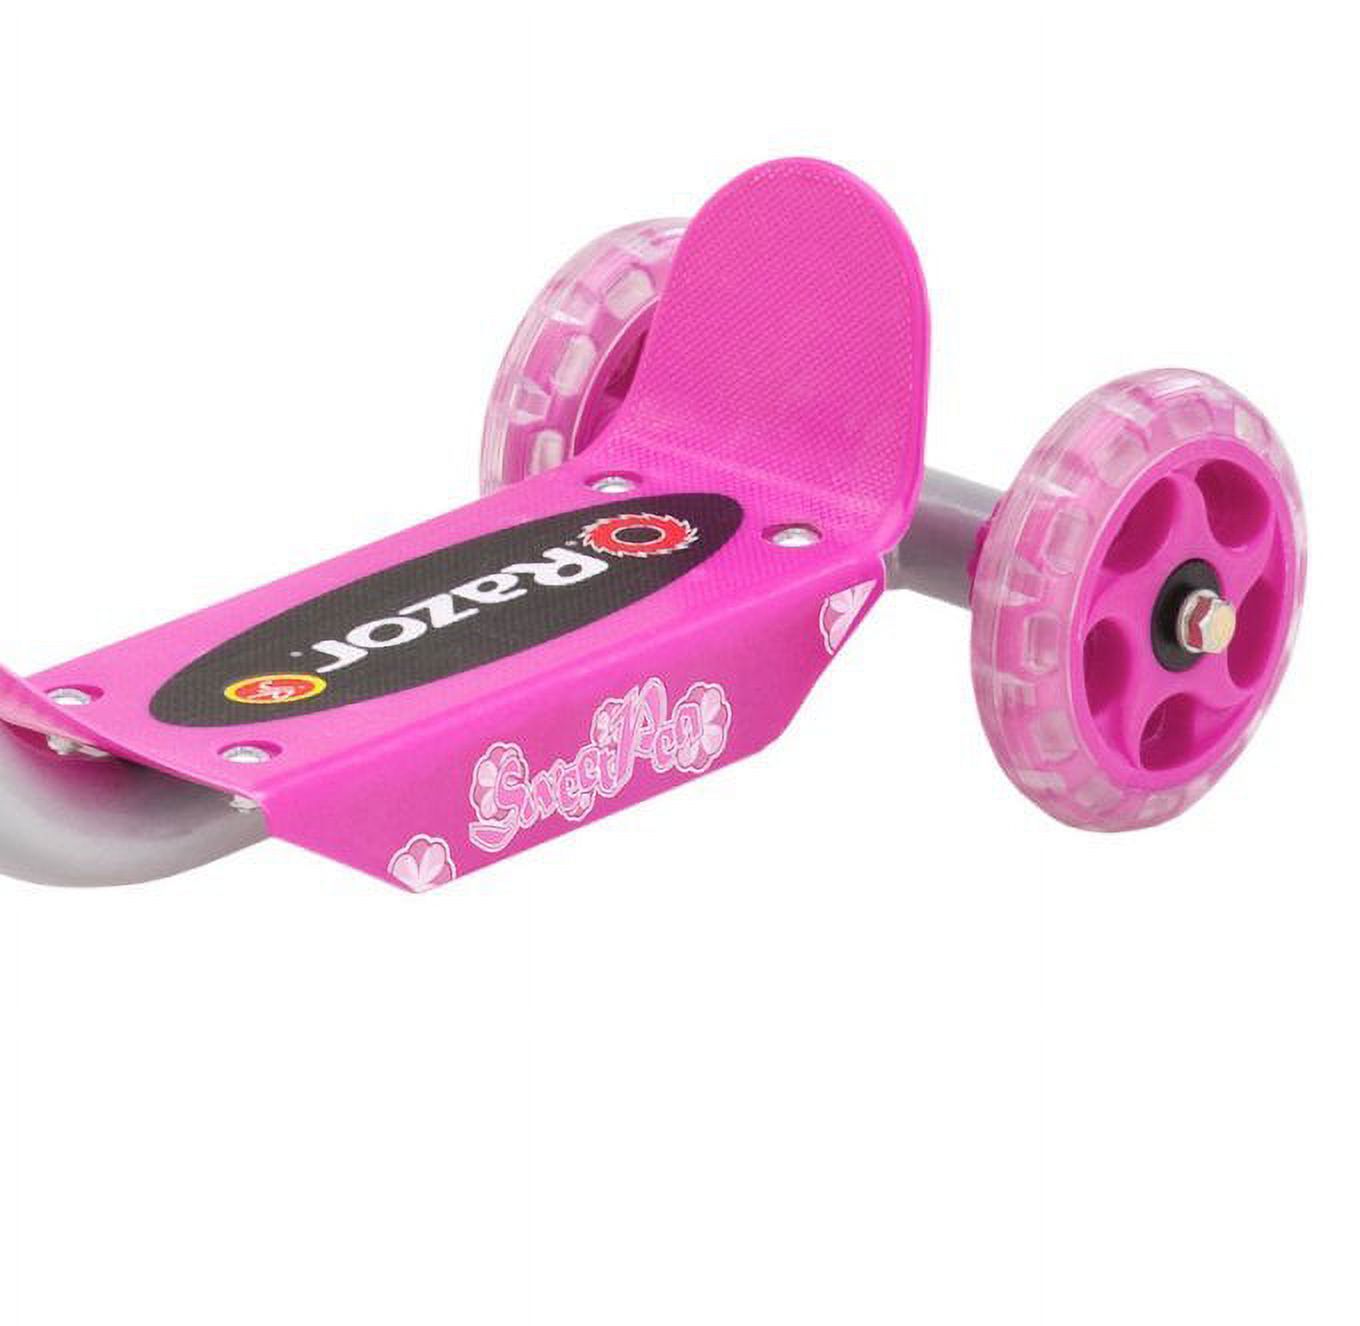 Razor Jr. 3-Wheel Lil' Kick Scooter - Ages 3+ and riders up to 44 lbs - image 4 of 7